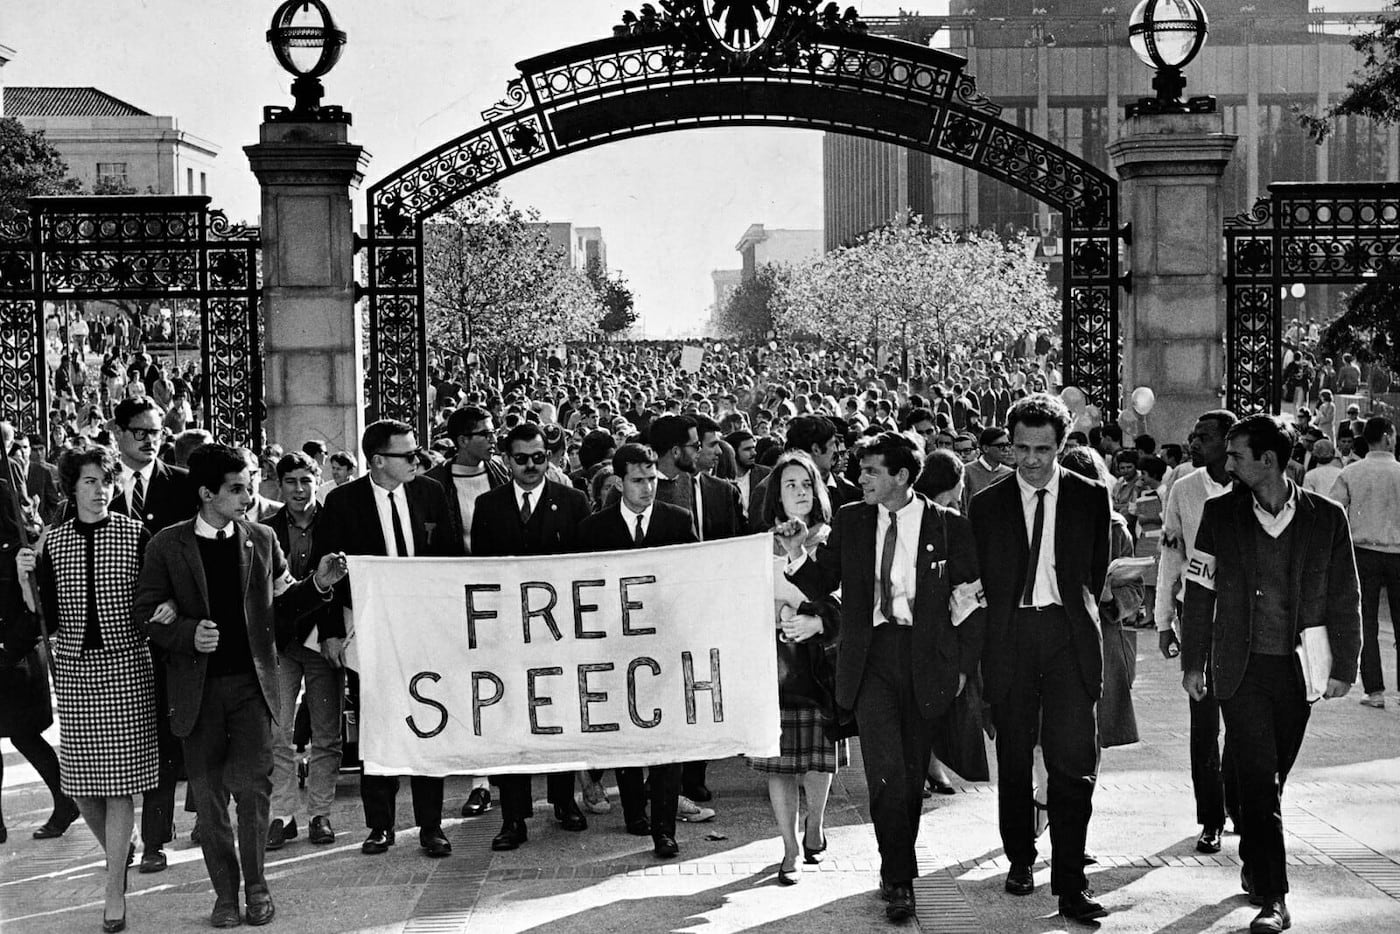 Protesters of the Free Speech Movement, at Sather Gate, University of California, Berkeley campus.
